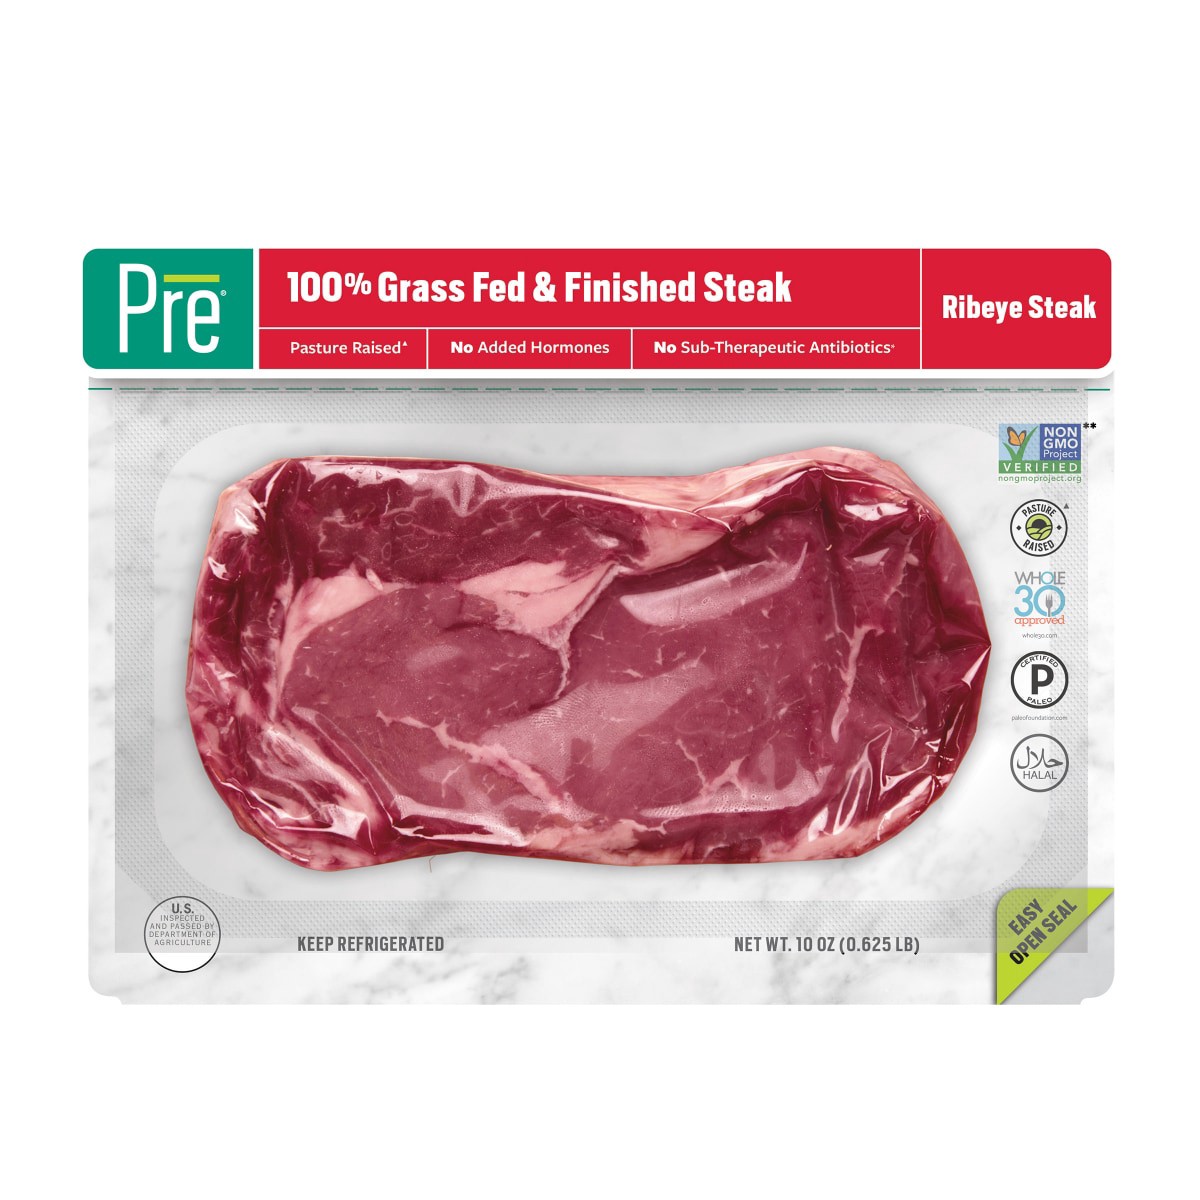 slide 1 of 16, Pre, Ribeye Steak  100% Grass-Fed, Grass-Finished, and Pasture-Raised Beef 10oz., 10 oz